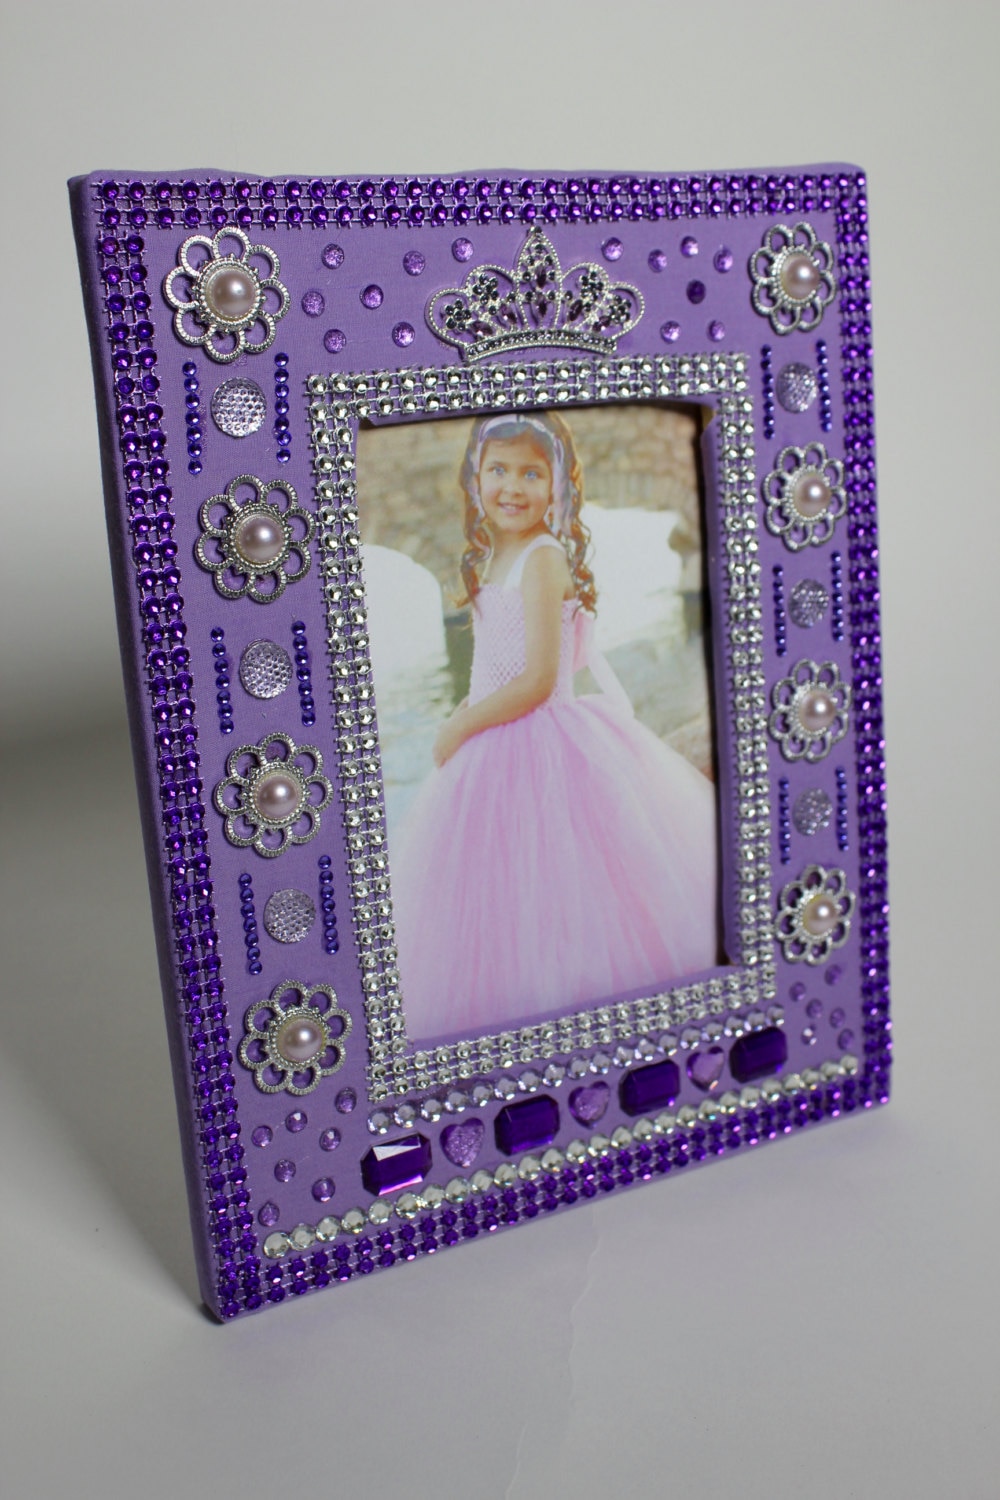 Princess Picture Frame Photo Frame 4 x 6 inches 10.16 x